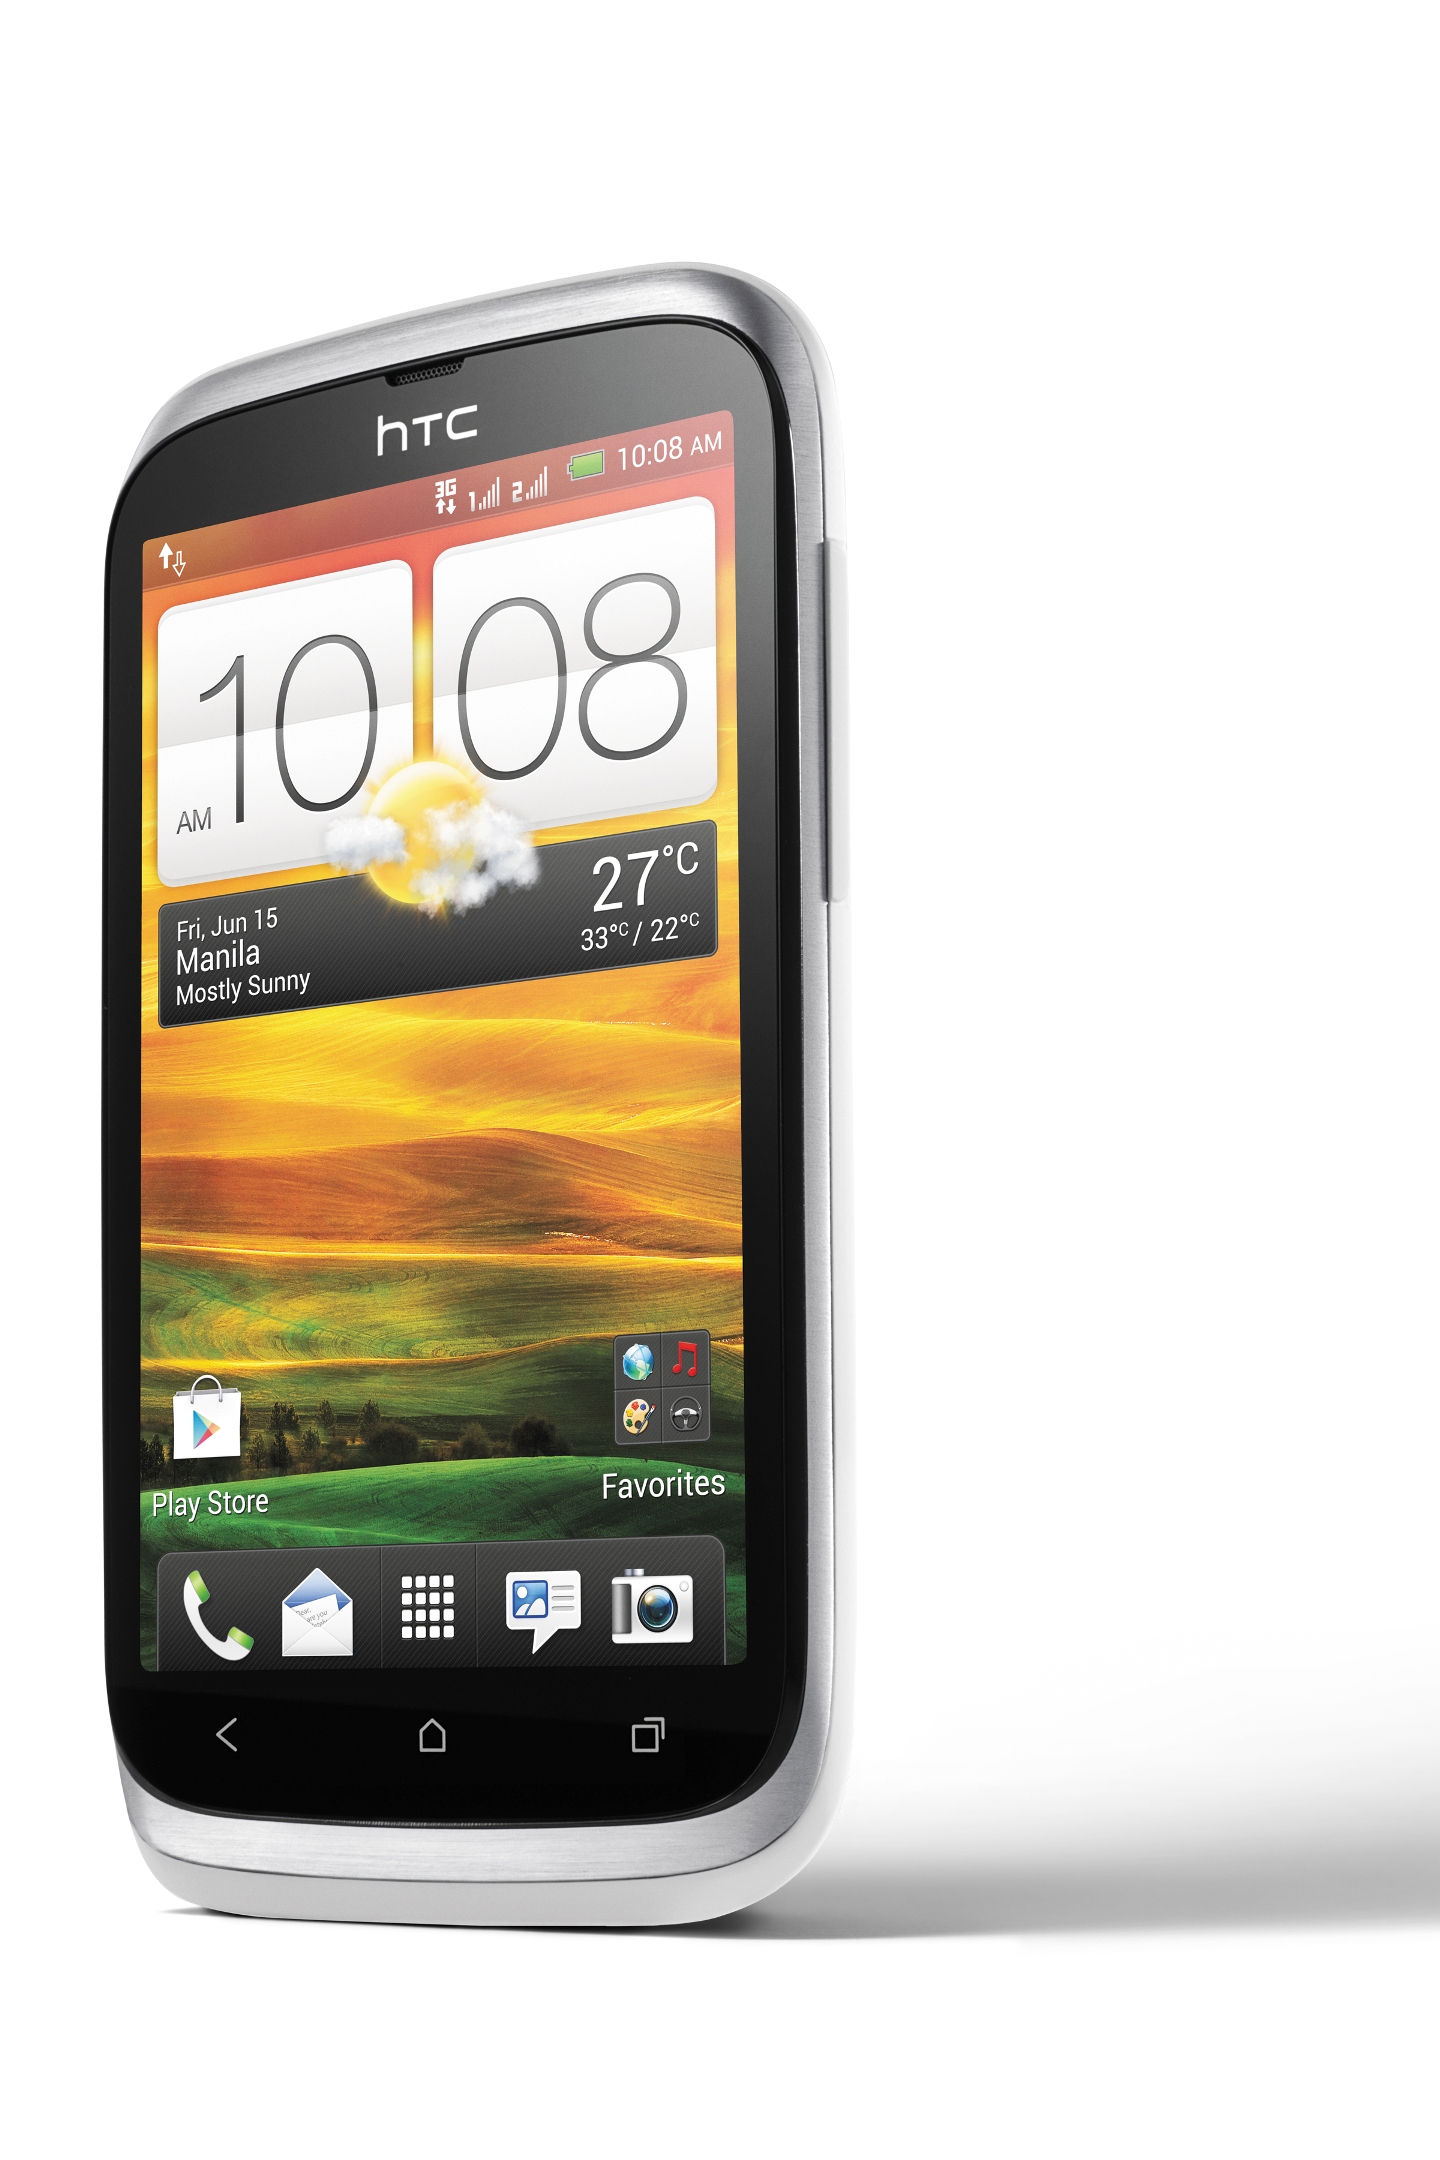 HTC Desire V is an Elegantly Designed and Powerful Dual-SIM Android Phone